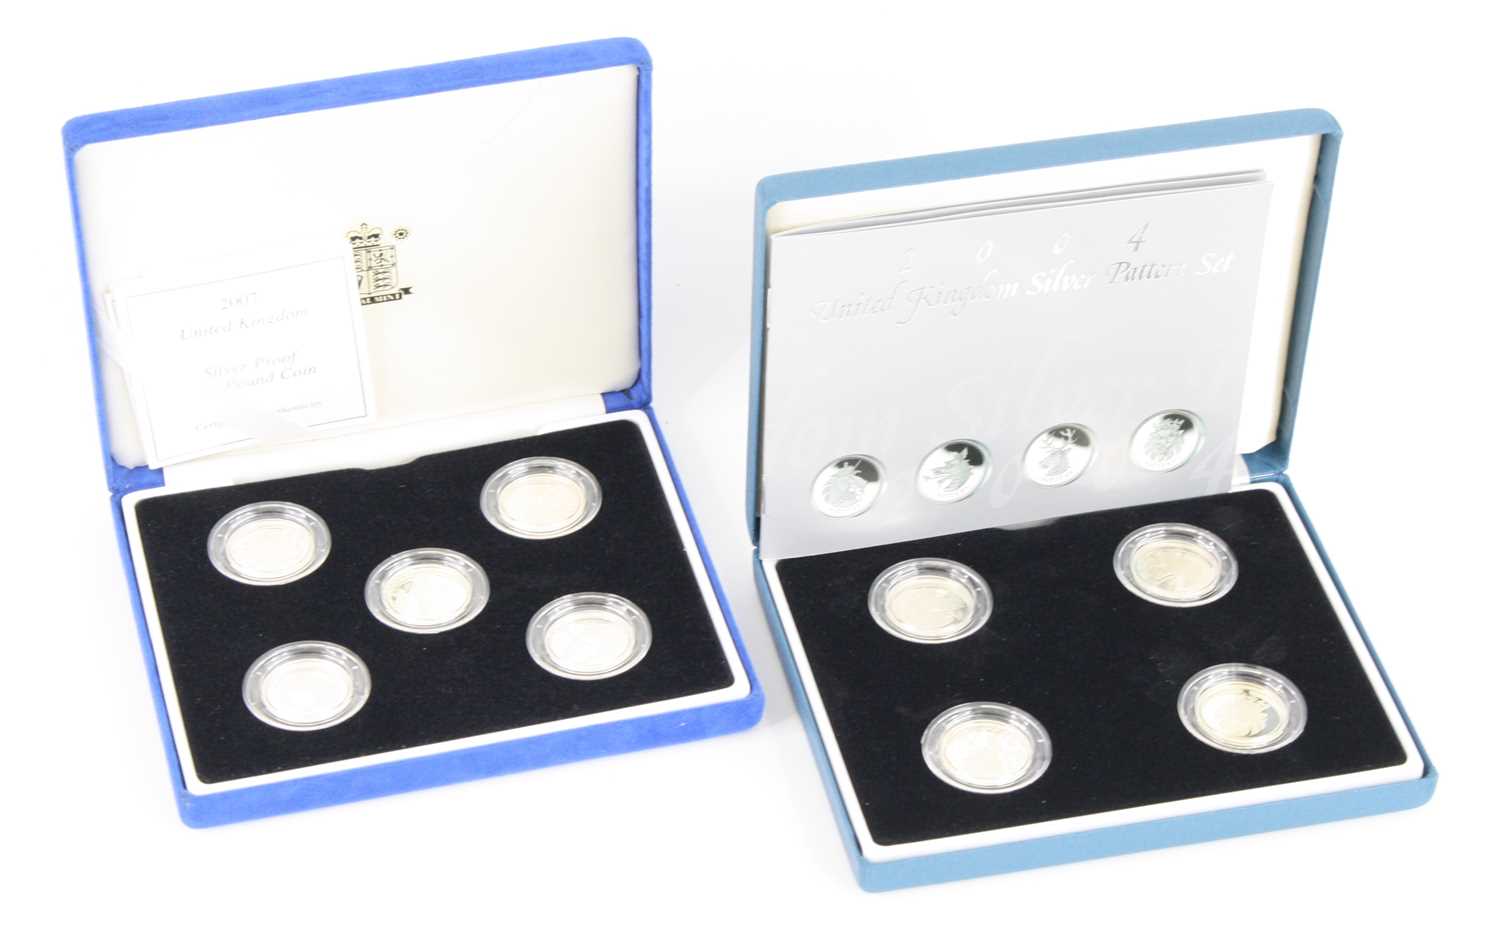 United Kingdom, The Royal Mint, a collection of five silver proof £1 coins, 2003-2007, cased with